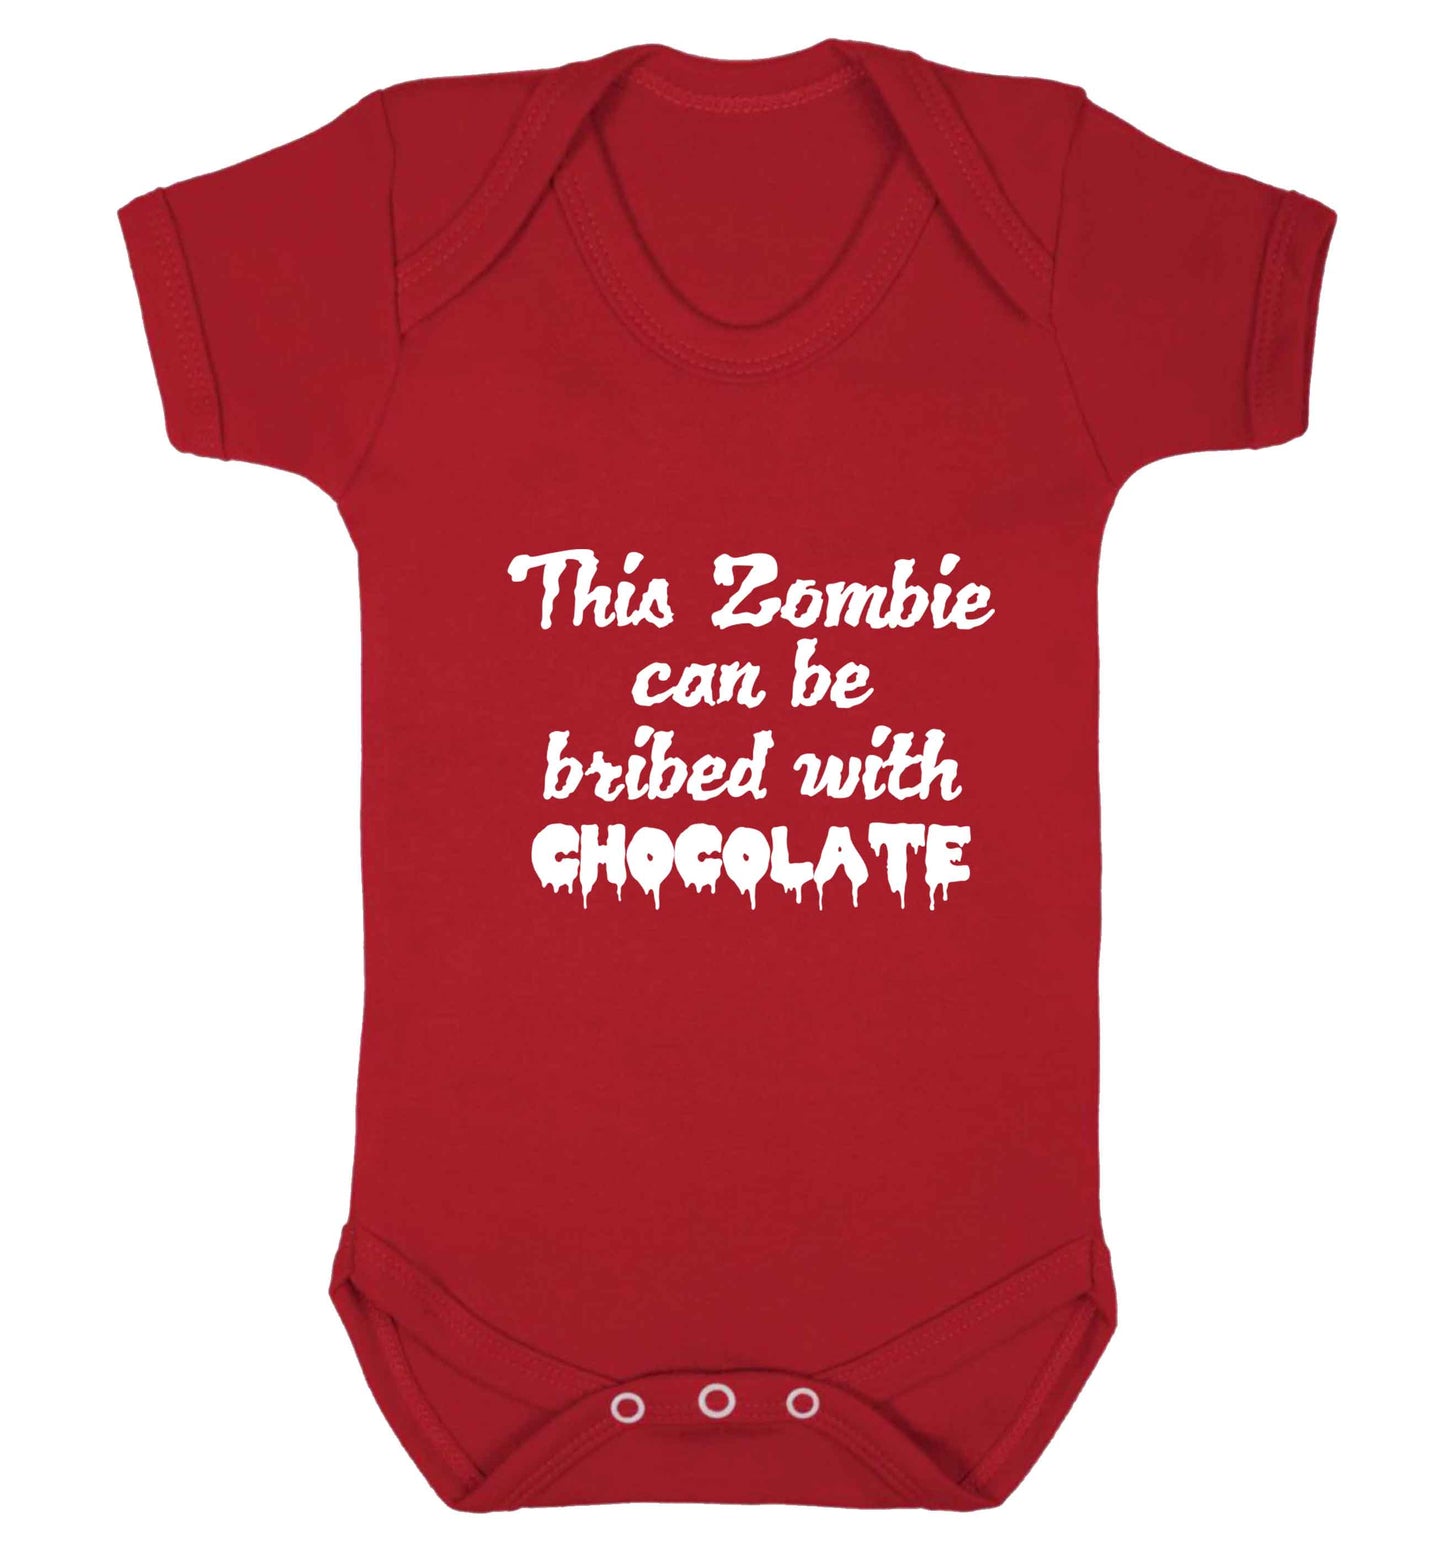 This zombie can be bribed with chocolate baby vest red 18-24 months